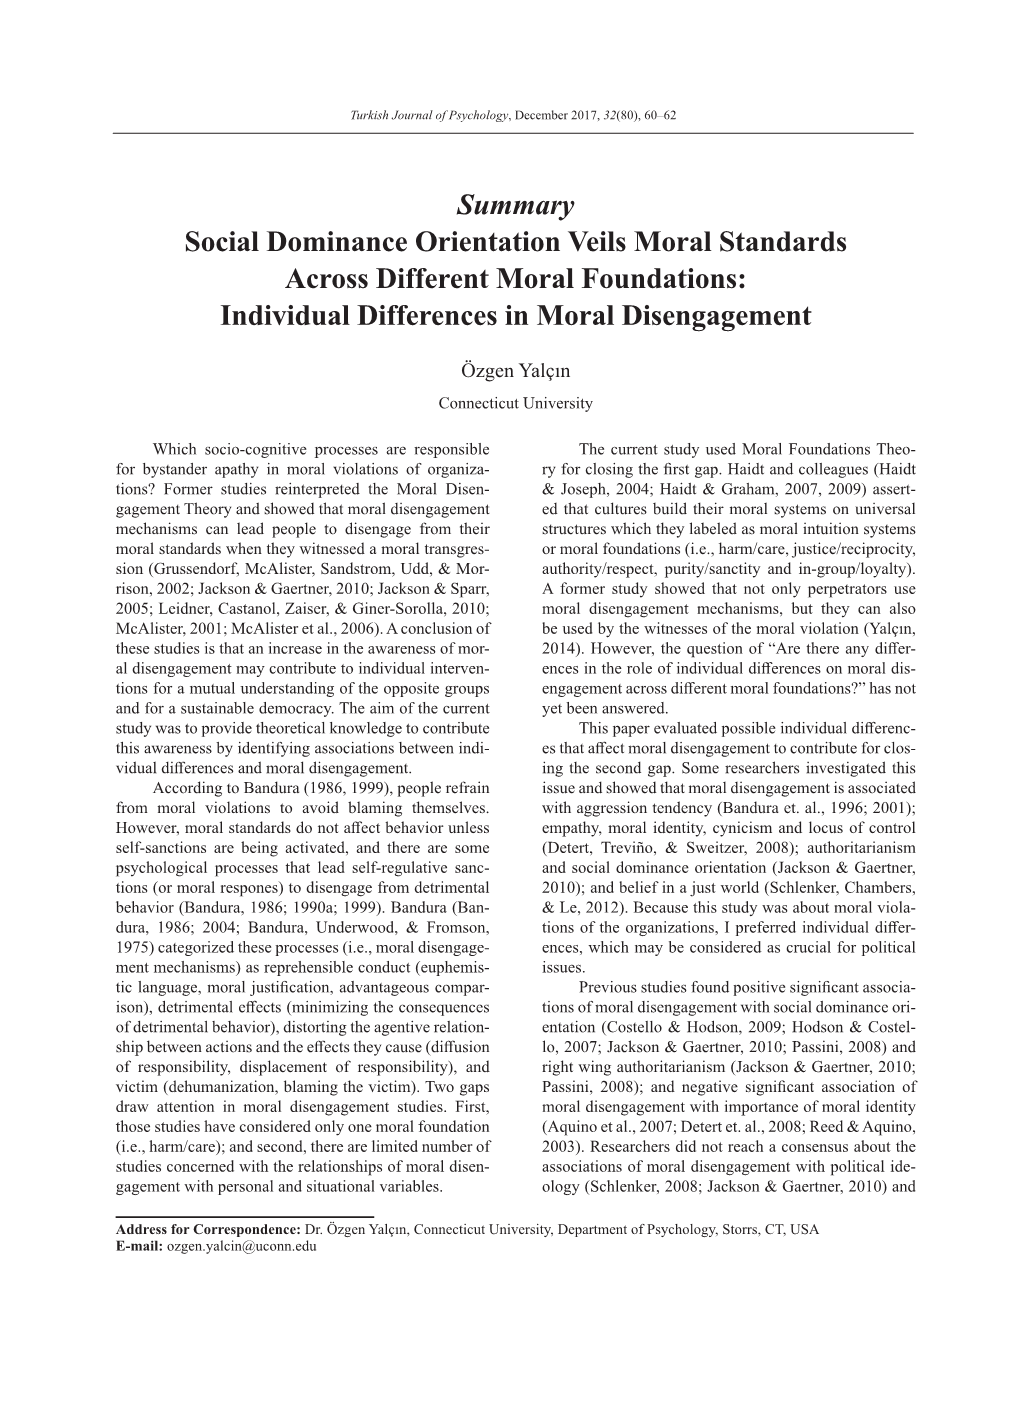 Summary Social Dominance Orientation Veils Moral Standards Across Different Moral Foundations: Individual Differences in Moral Disengagement